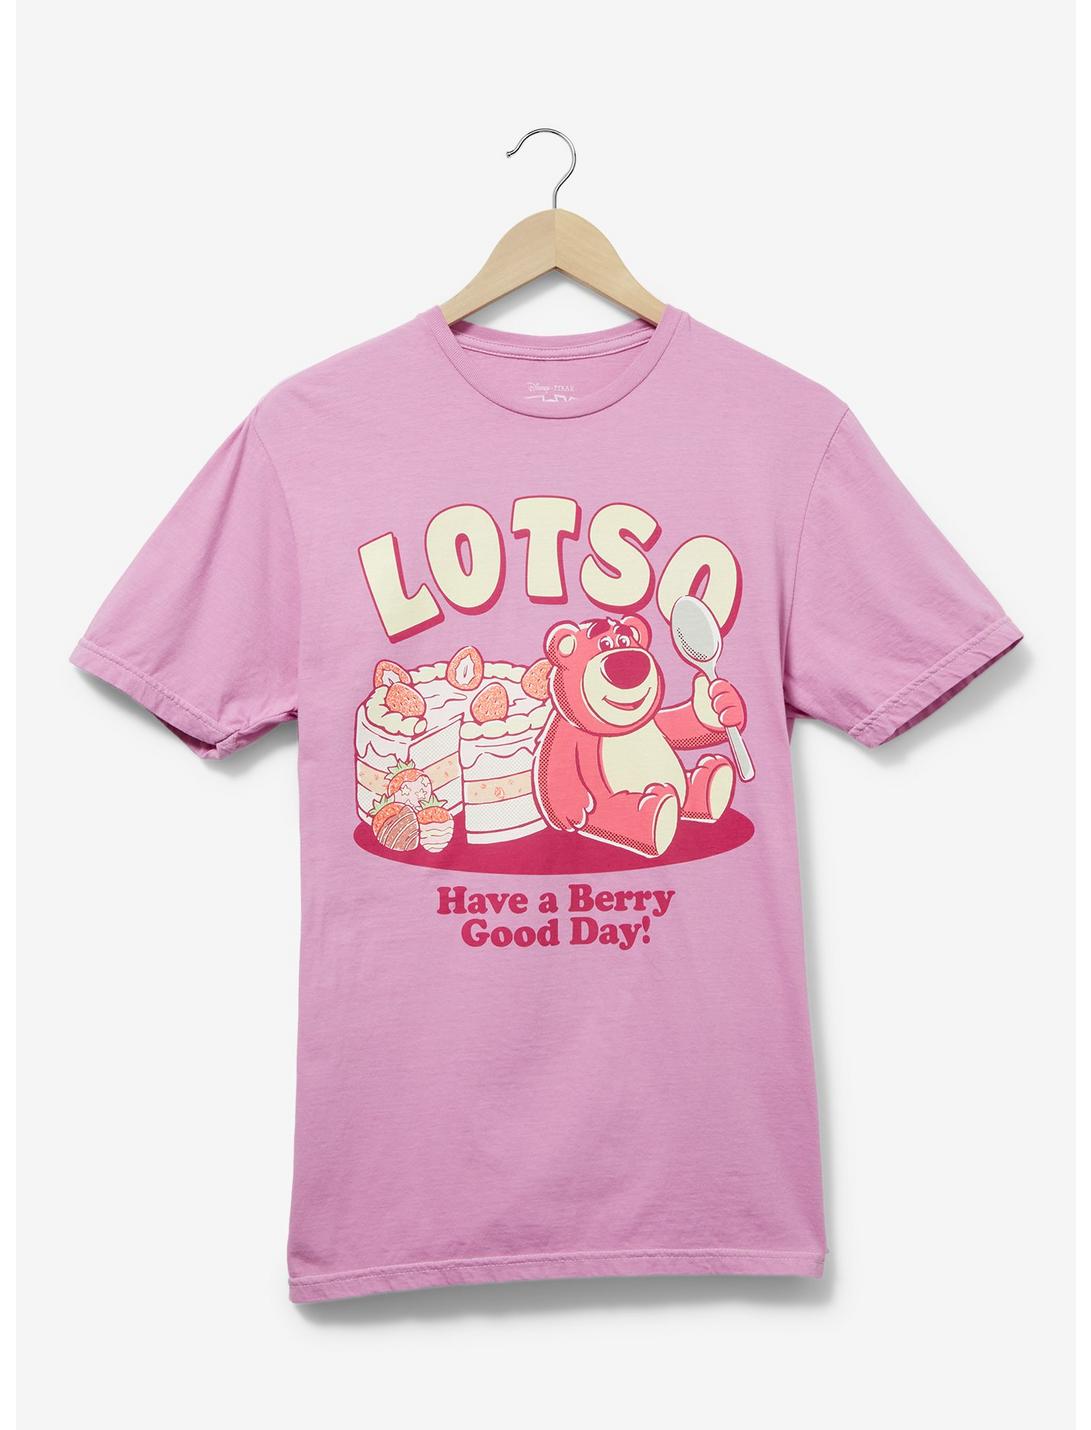 Disney Pixar Toy Story 3 Lotso Berry Good Day Women's T-Shirt — BoxLunch Exclusive, PINK, hi-res